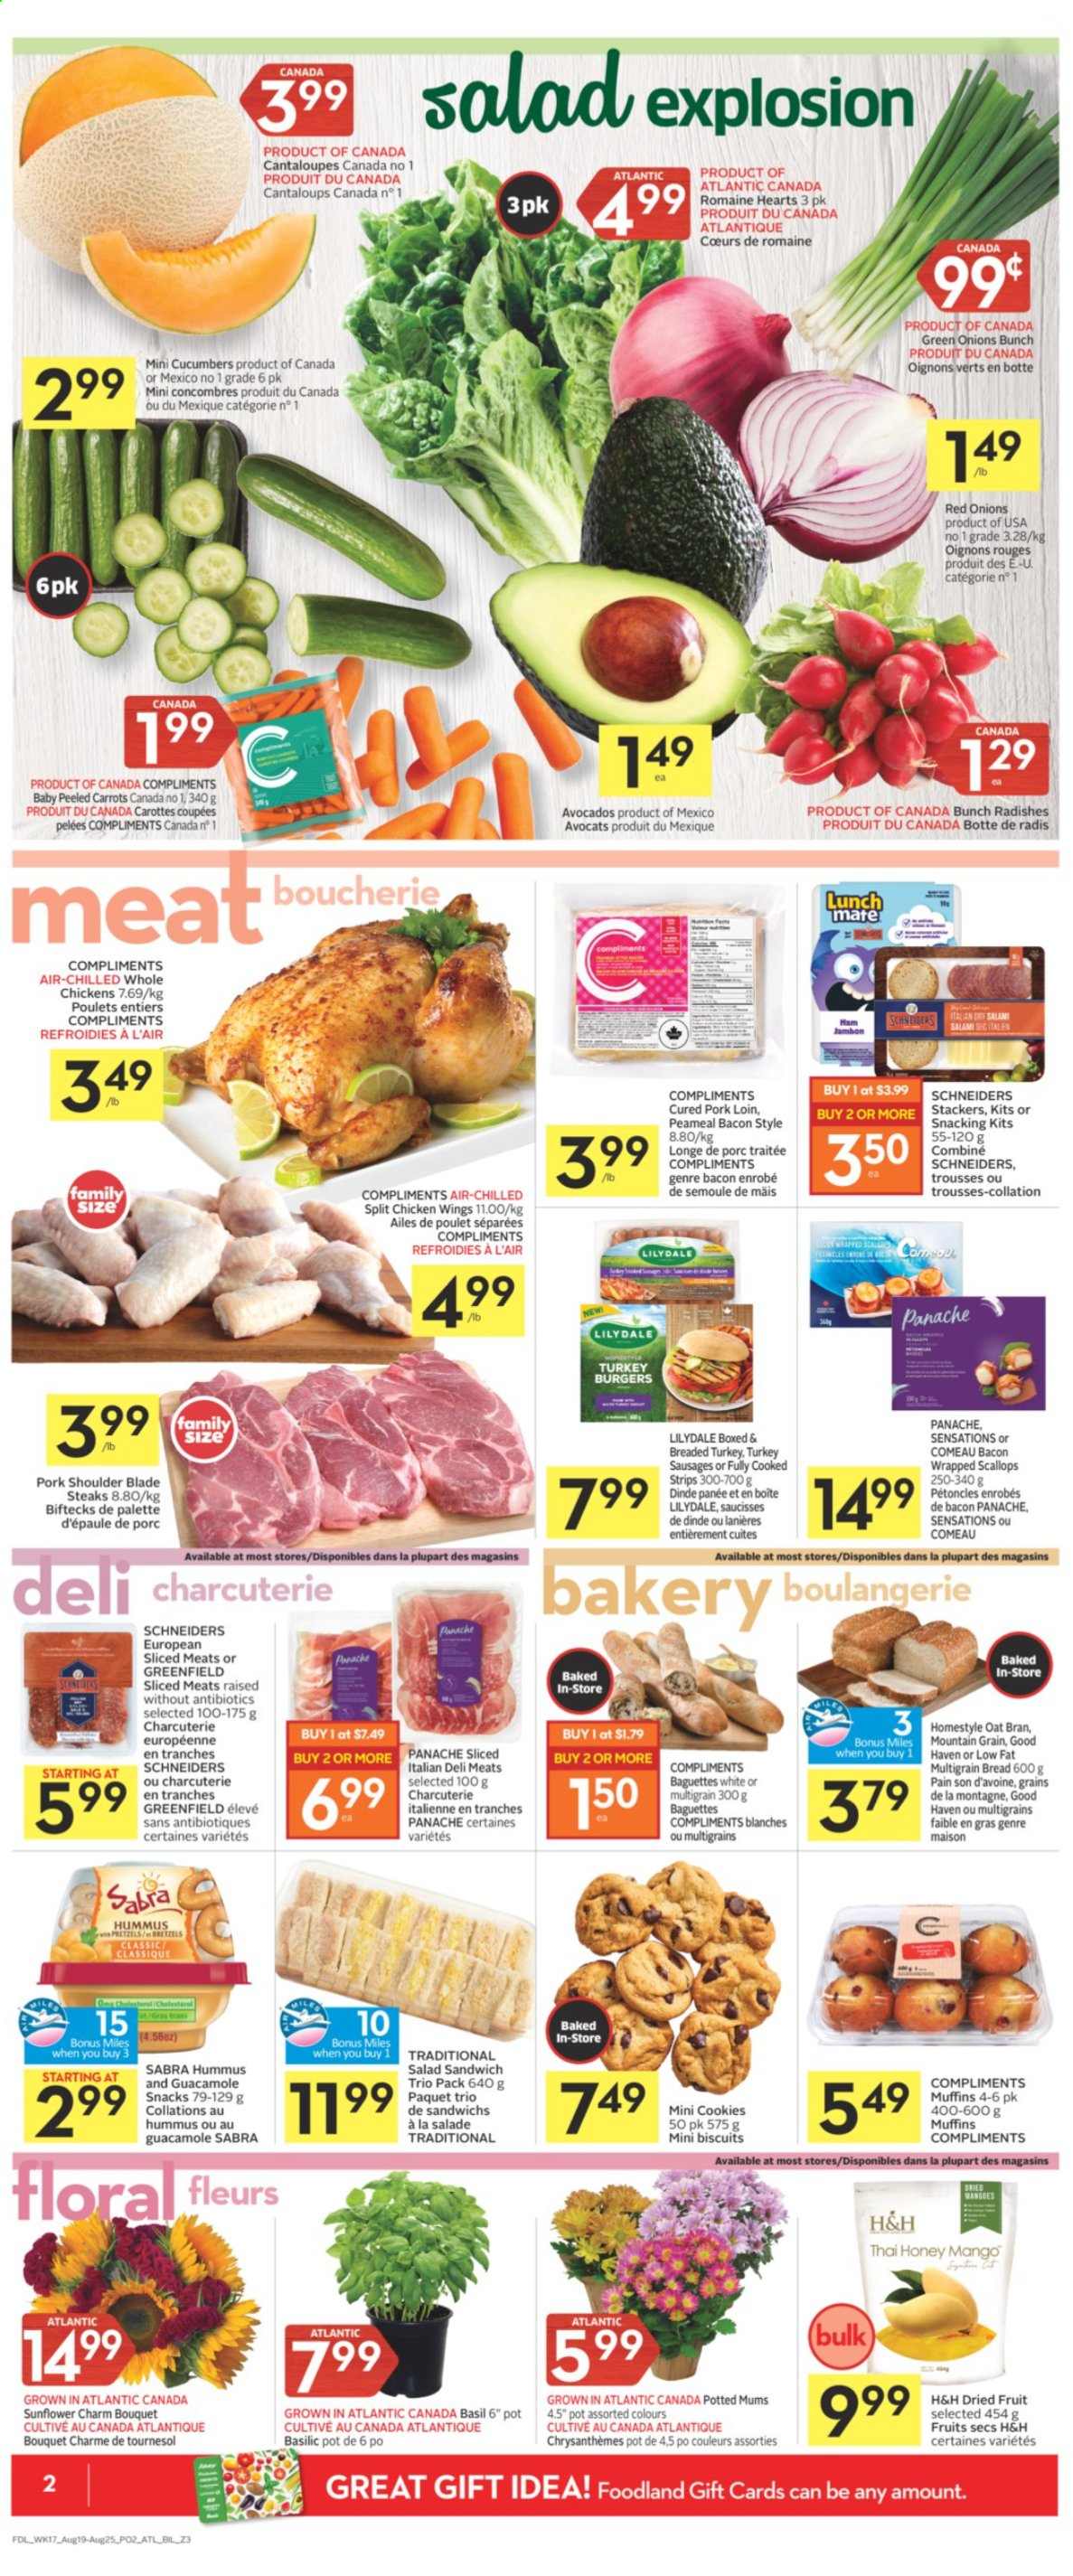 thumbnail - Co-op Flyer - August 19, 2021 - August 25, 2021 - Sales products - bread, multigrain bread, pretzels, muffin, cantaloupe, carrots, cucumber, radishes, red onions, salad, green onion, mango, bacon wrapped scallops, scallops, sandwich, hamburger, bacon, salami, ham, sausage, hummus, guacamole, chicken wings, strips, cookies, snack, biscuit, oats, esponja, honey, dried fruit, whole chicken, turkey burger, pork loin, pork meat, pork shoulder, steak. Page 2.